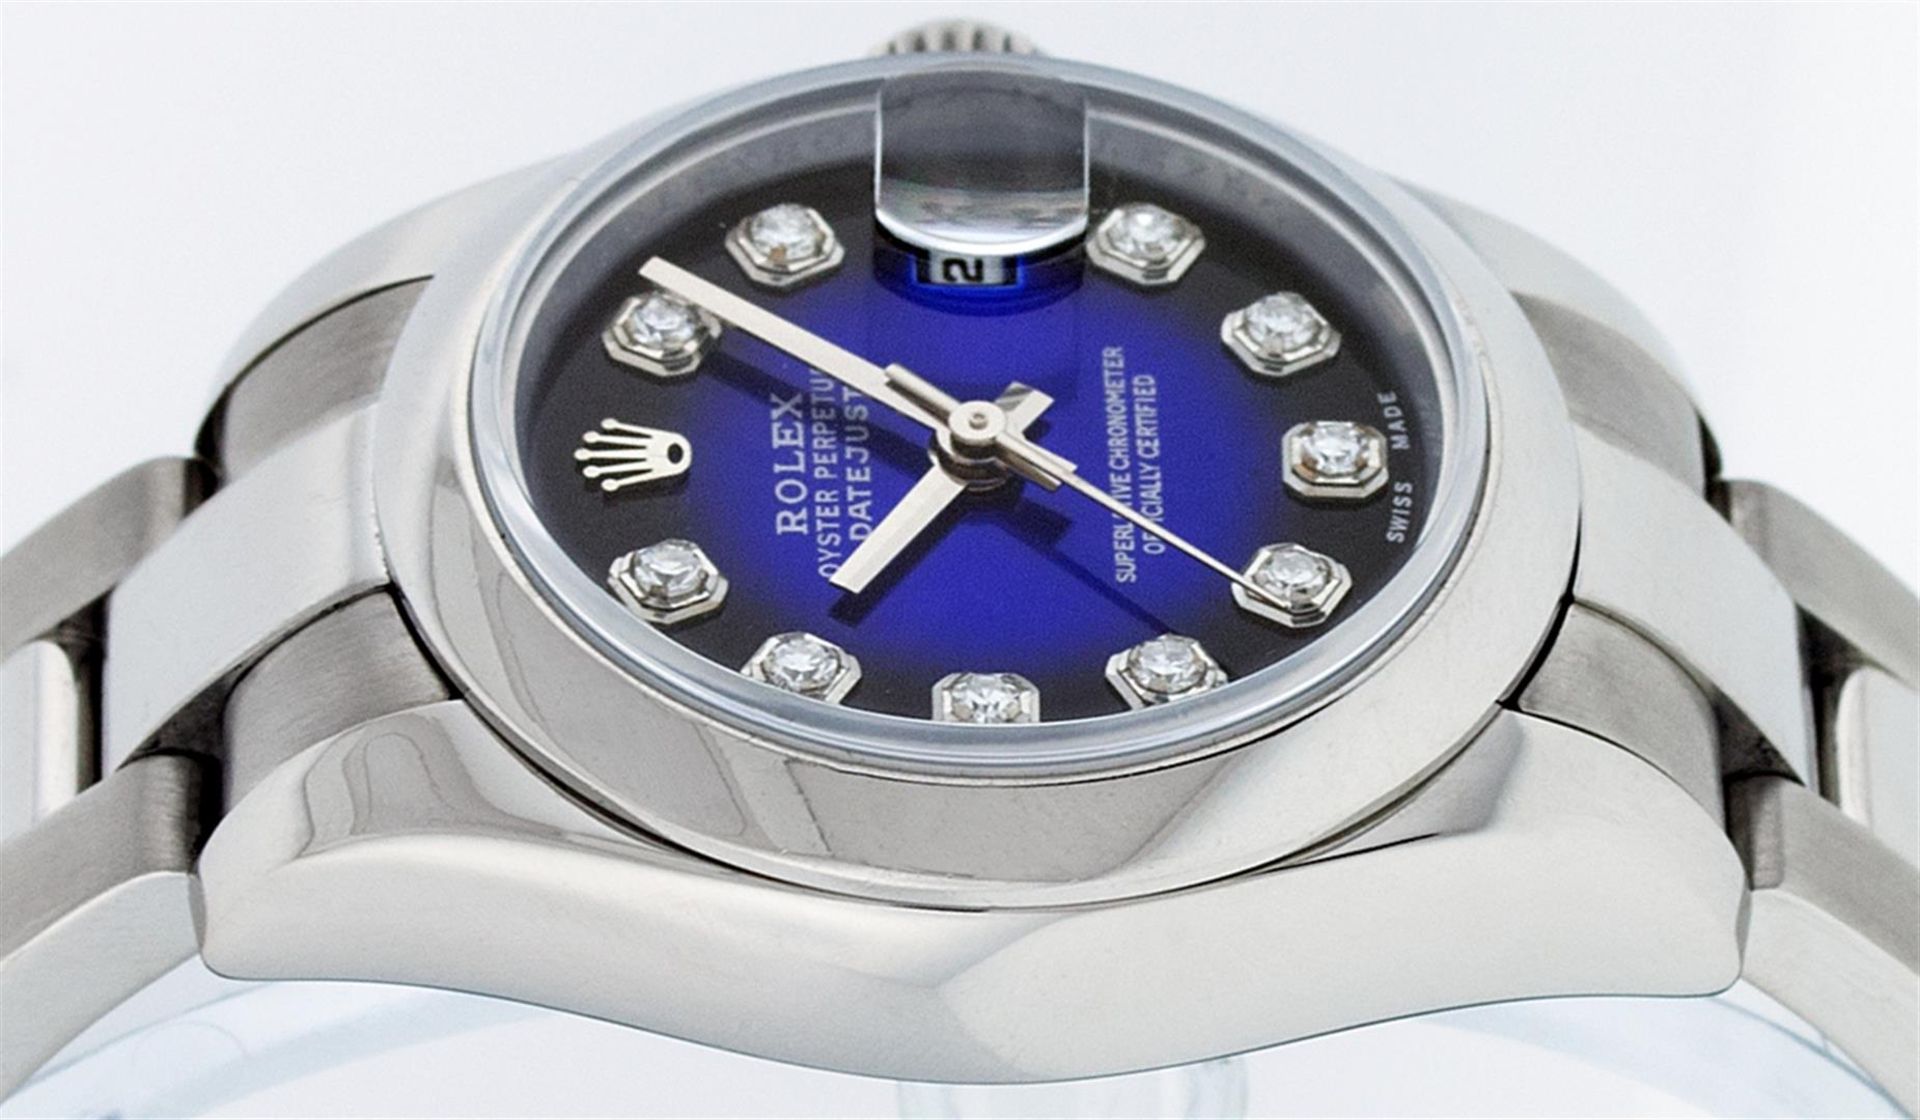 Rolex Ladies New Style Quickset Datejust Blue Diamond Oyster Perpetual Datejust - Image 3 of 9